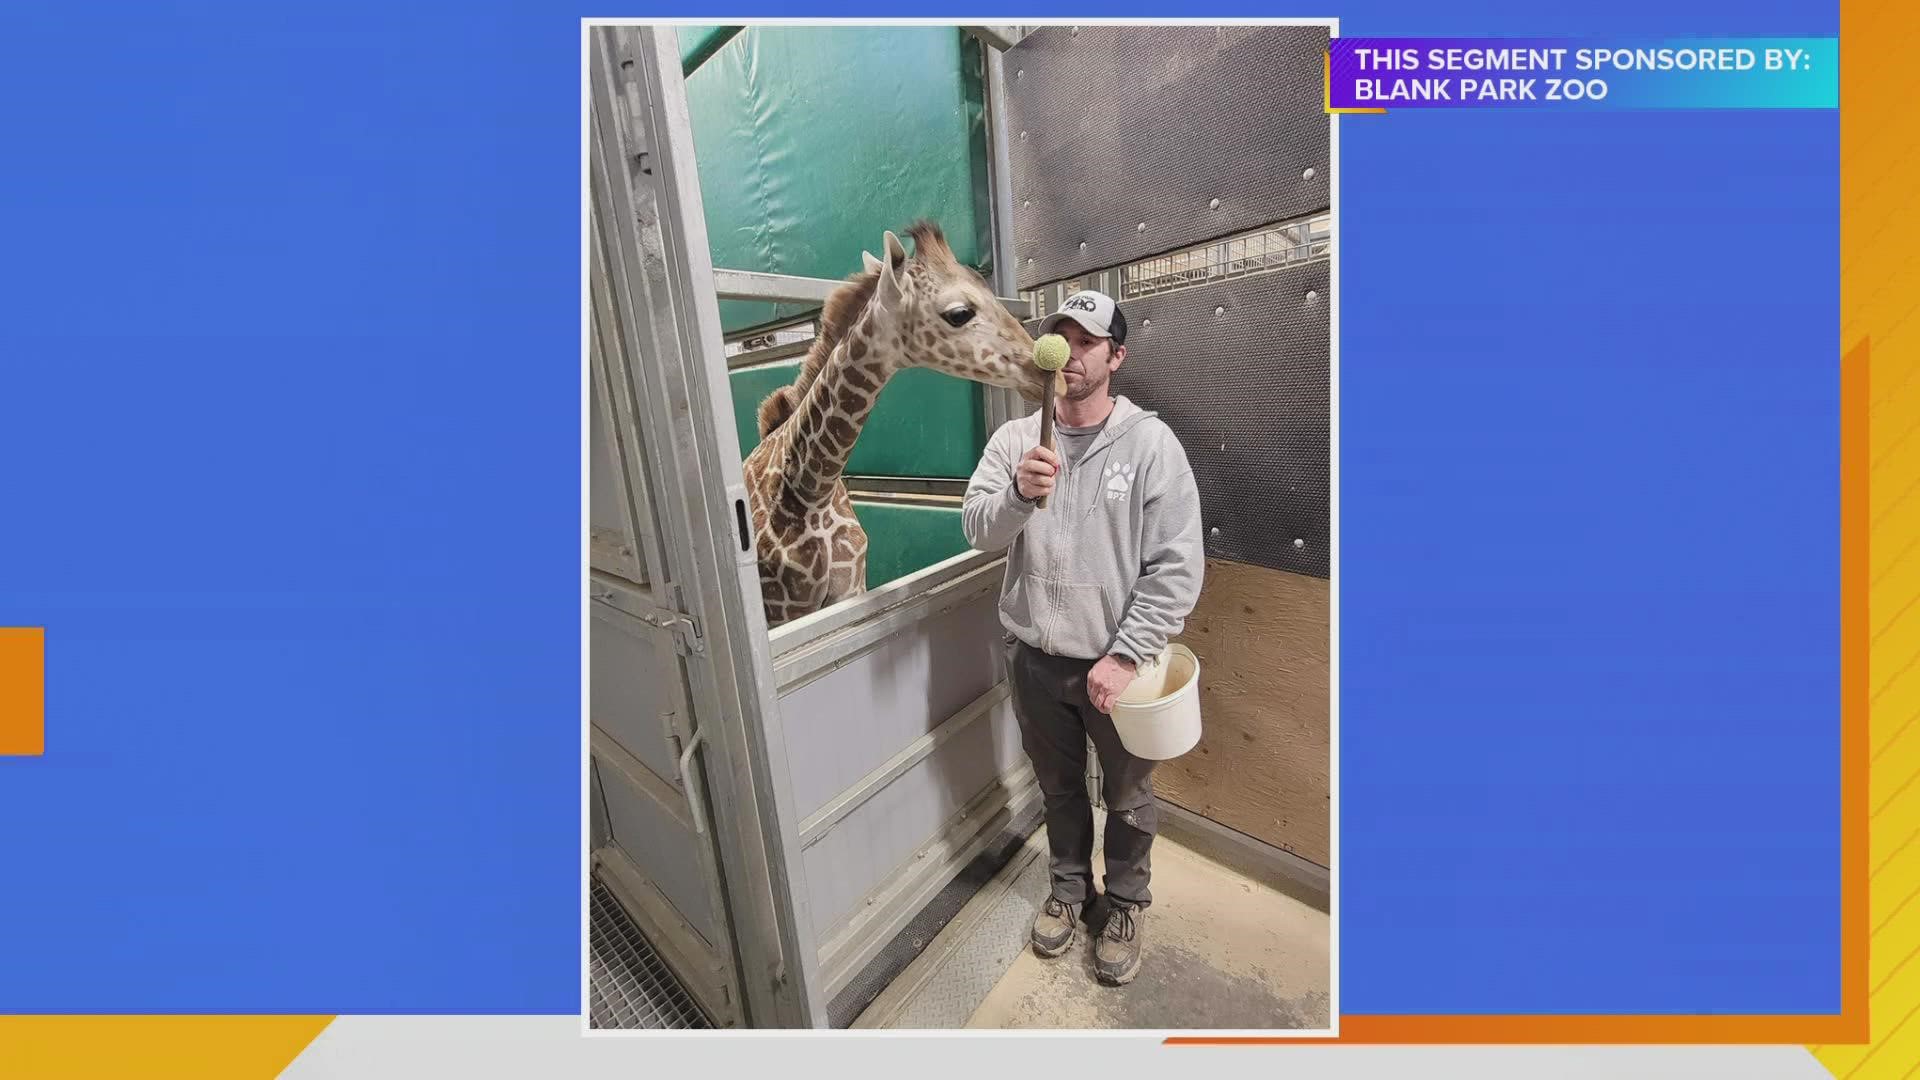 Jay Tetzloff, Chief Animal Officer-BPZ, has an update on 4 month old giraffe "Bakari" including how much he has grown since being born in Des Moines | Paid Content